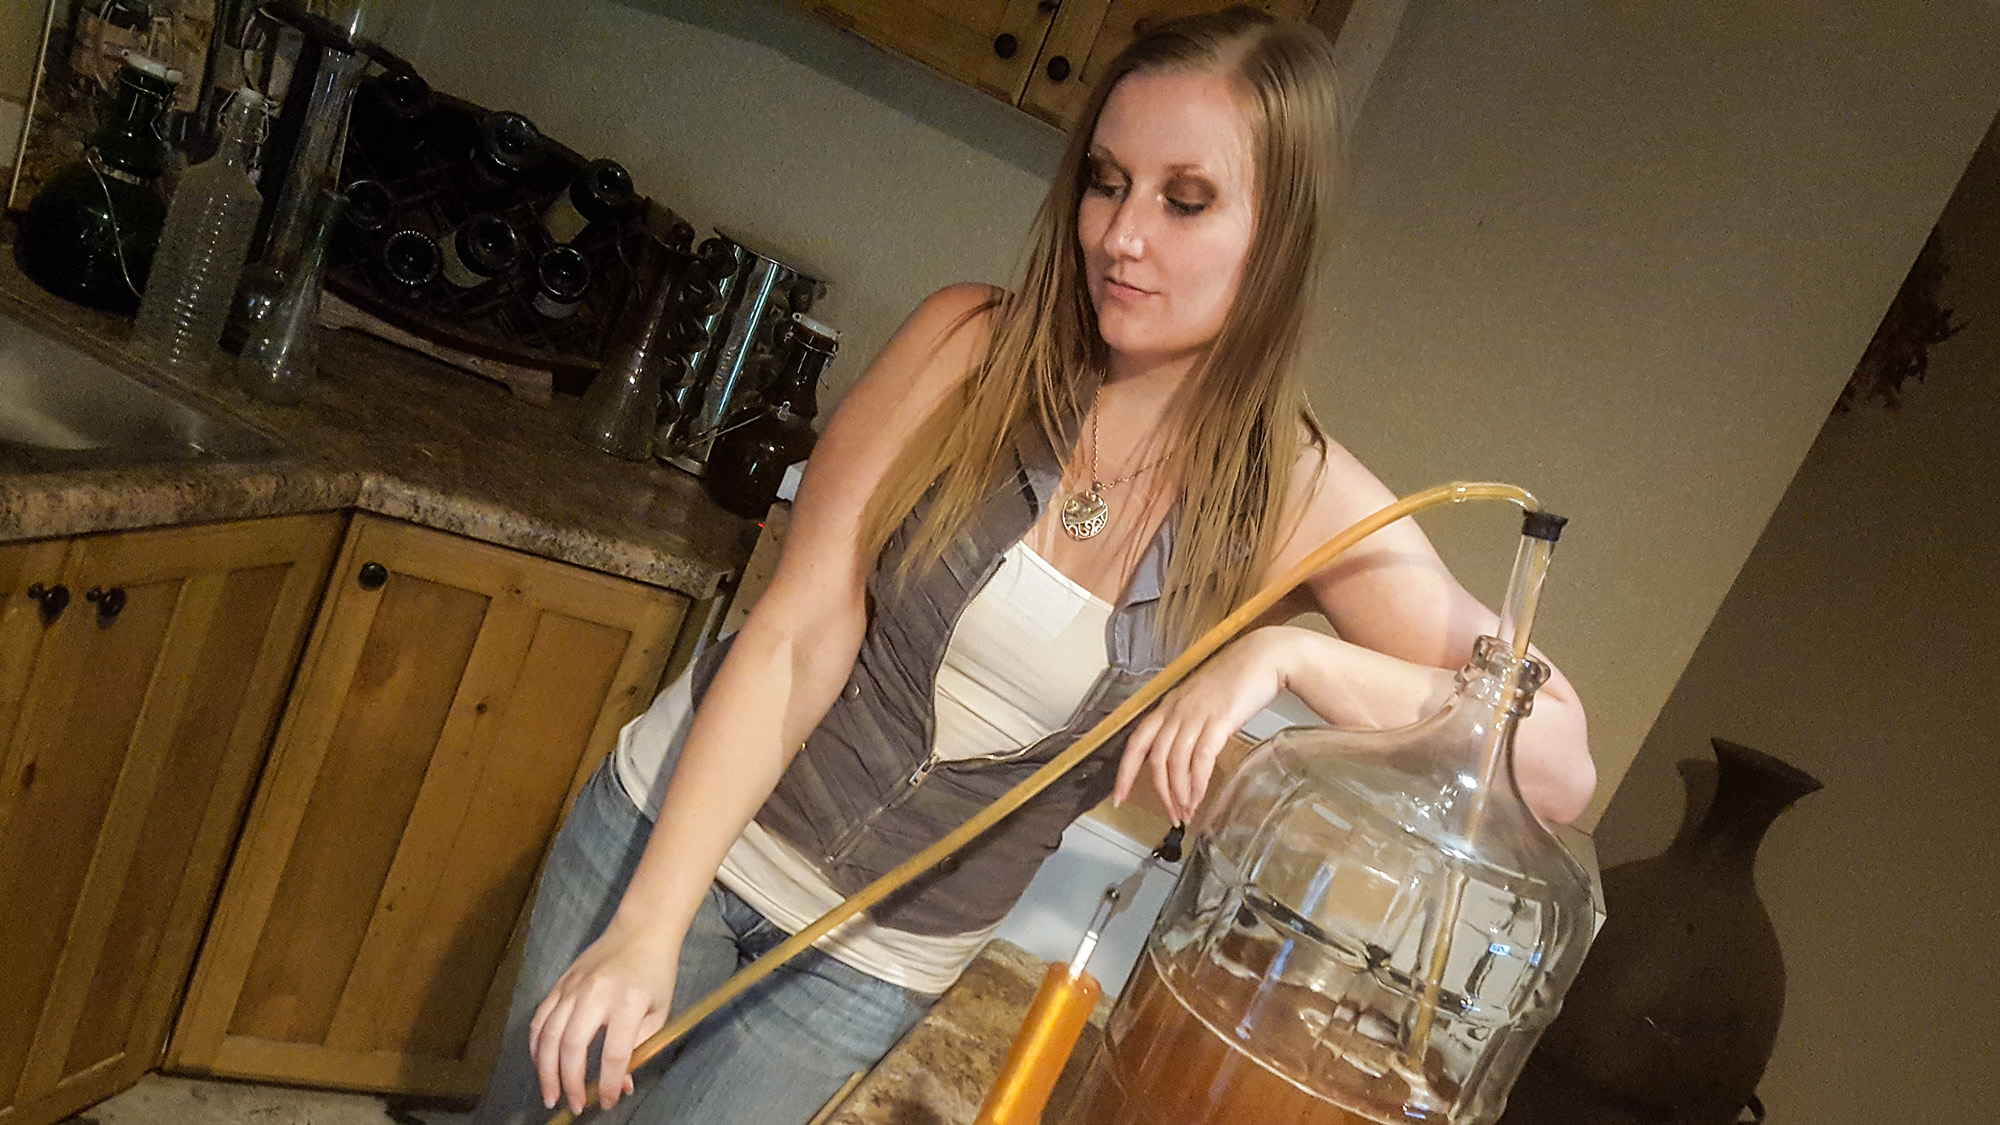 Image of Mikenzie Tavenner Hardman brewing a new beer in her kitchen.